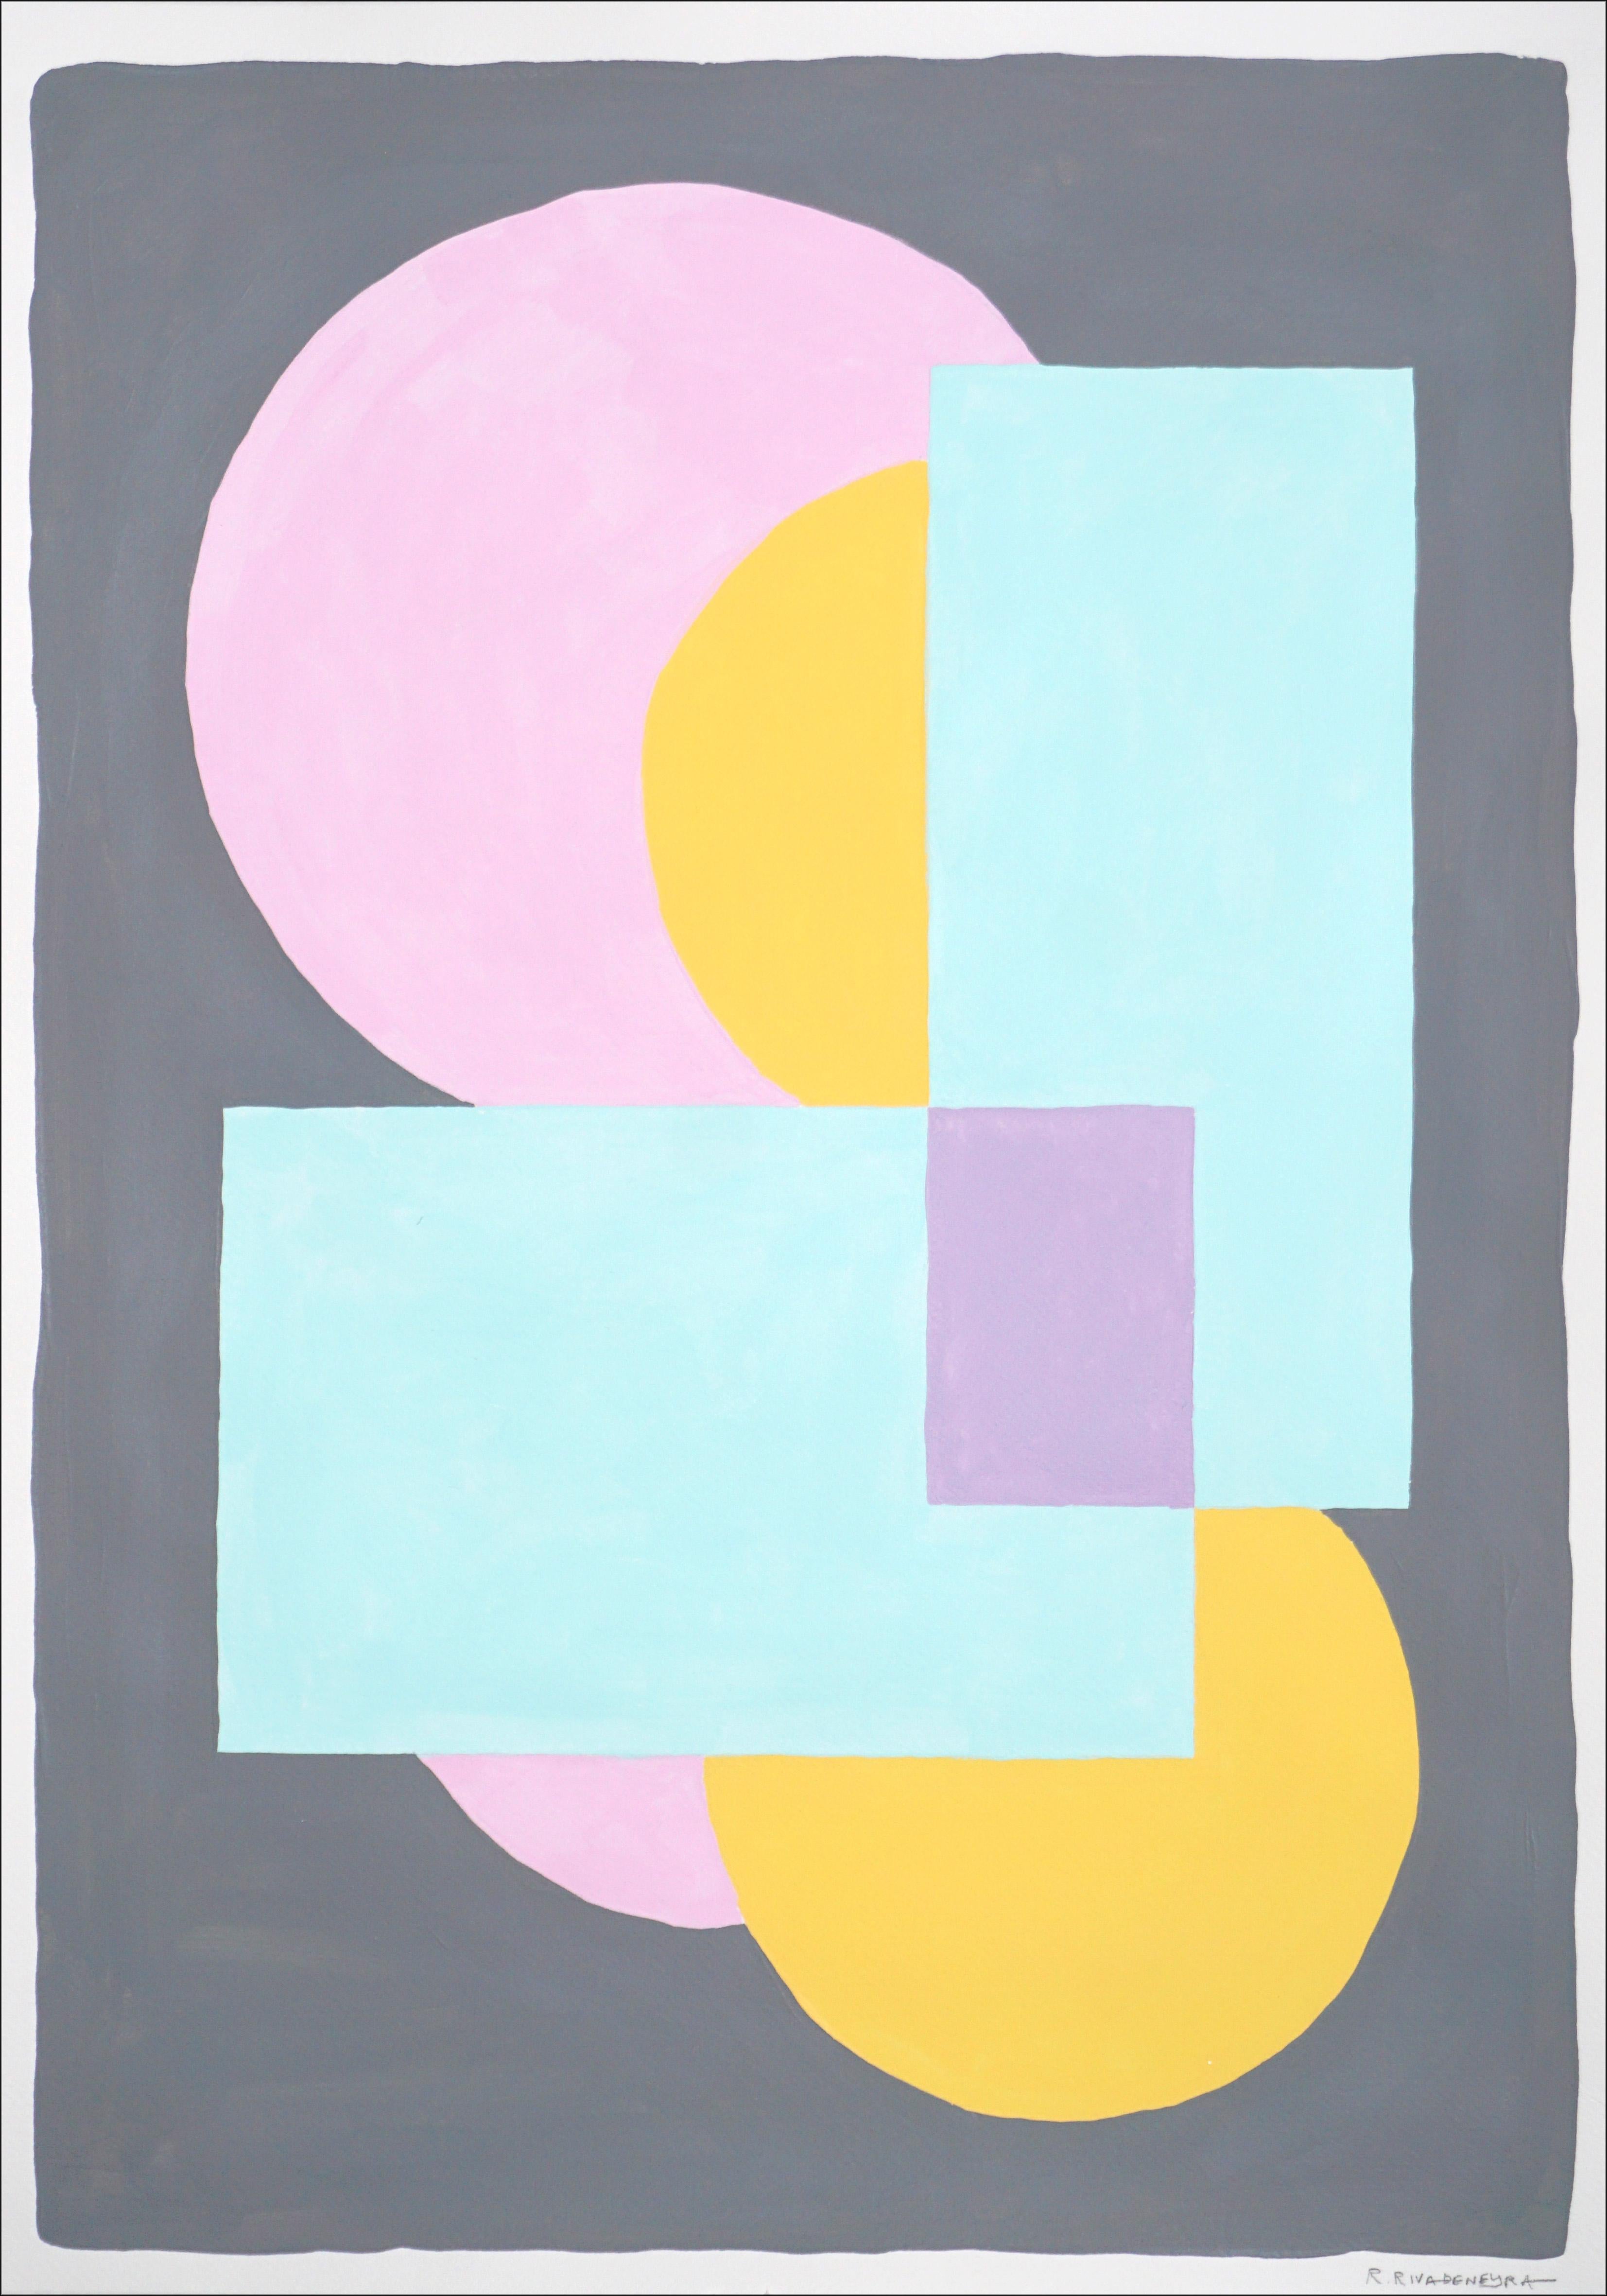 Geometric Bloom in Pastel Tones, Constructivist Symmetry in Gray, Pink and Blue